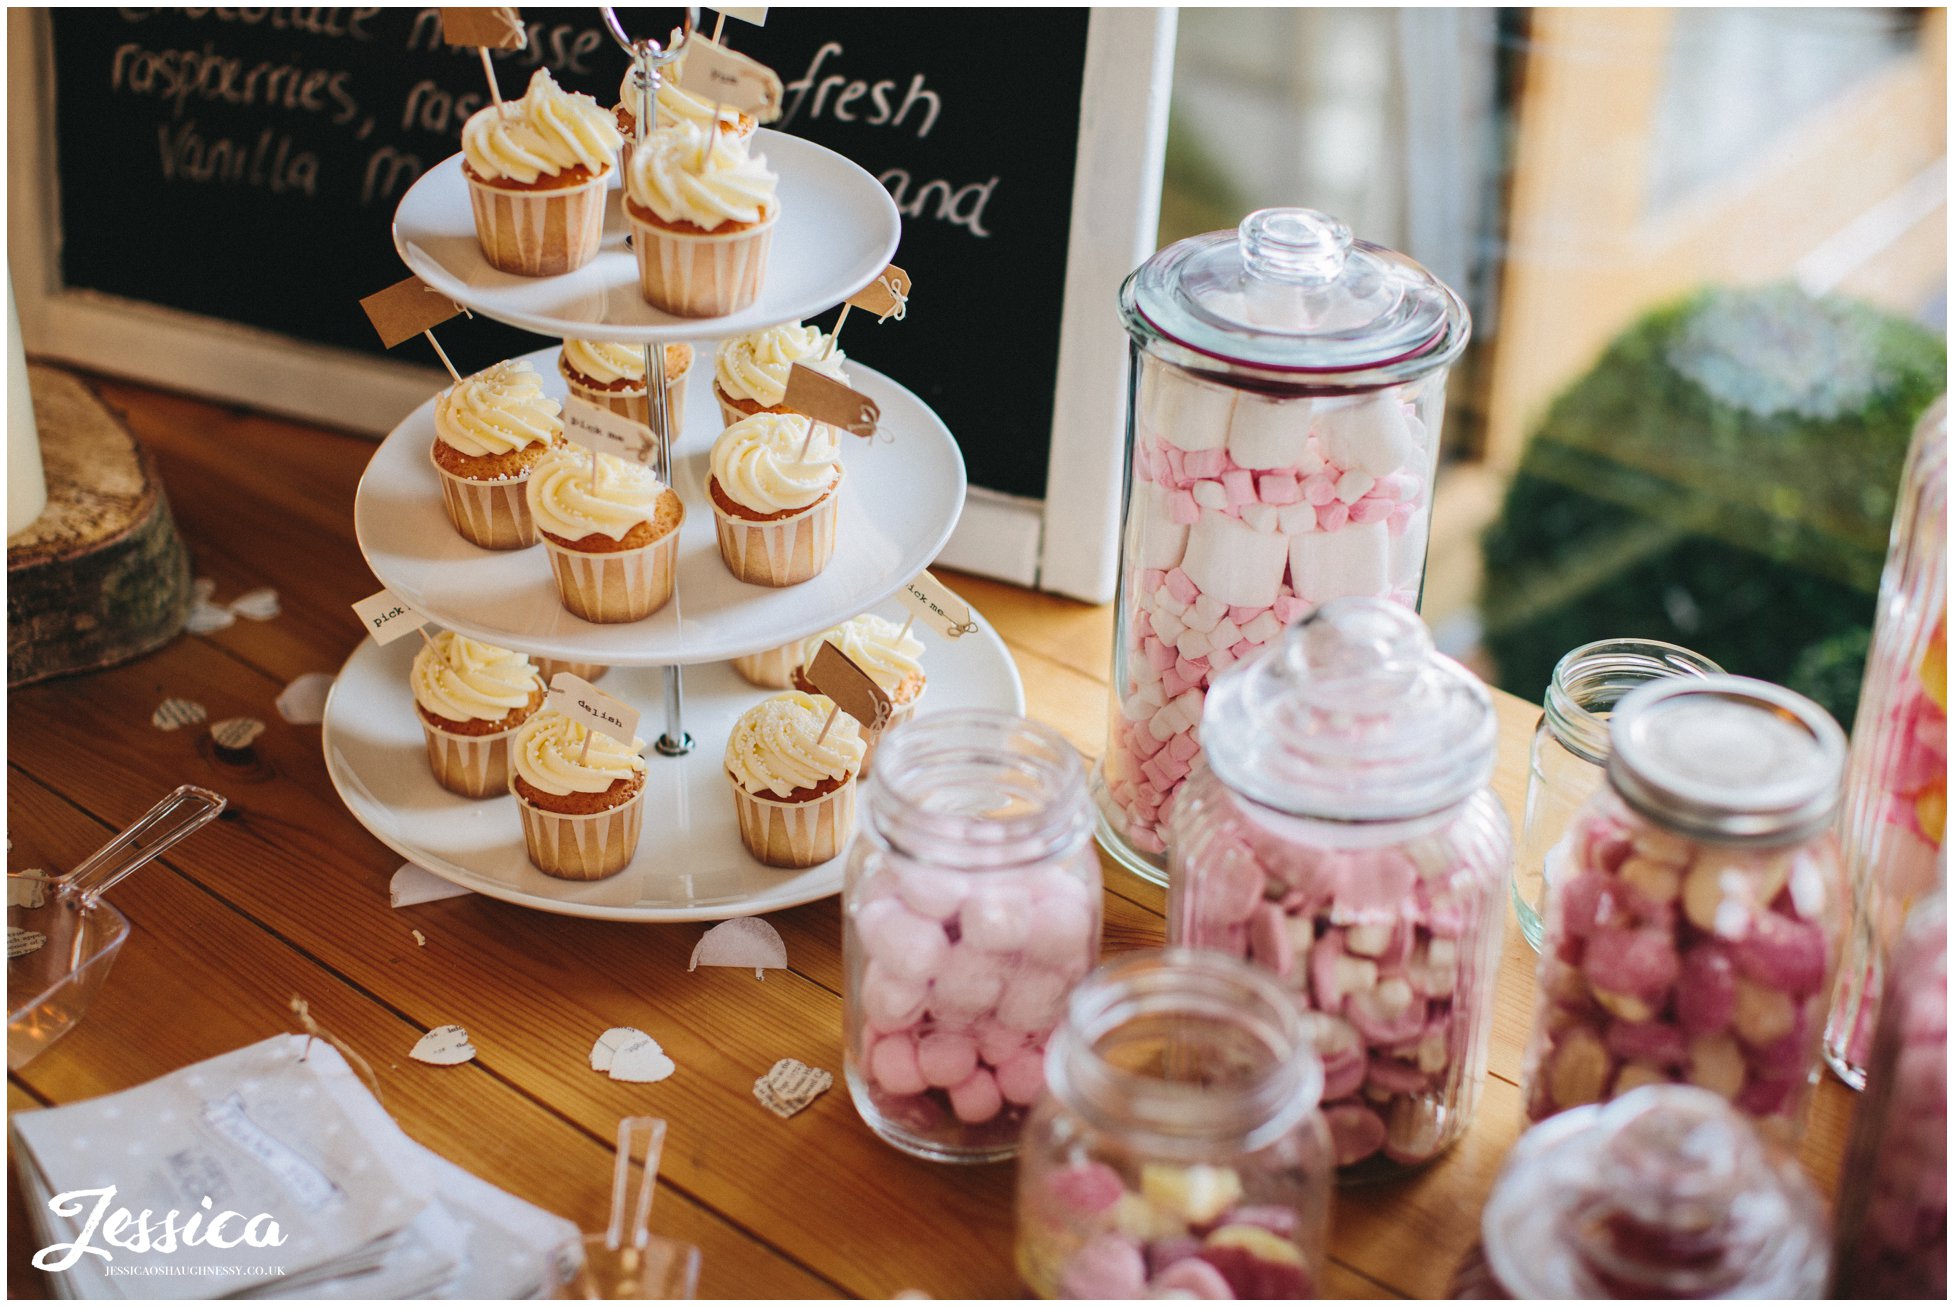 cupcakes provided for guests at the wedding reception in north wales